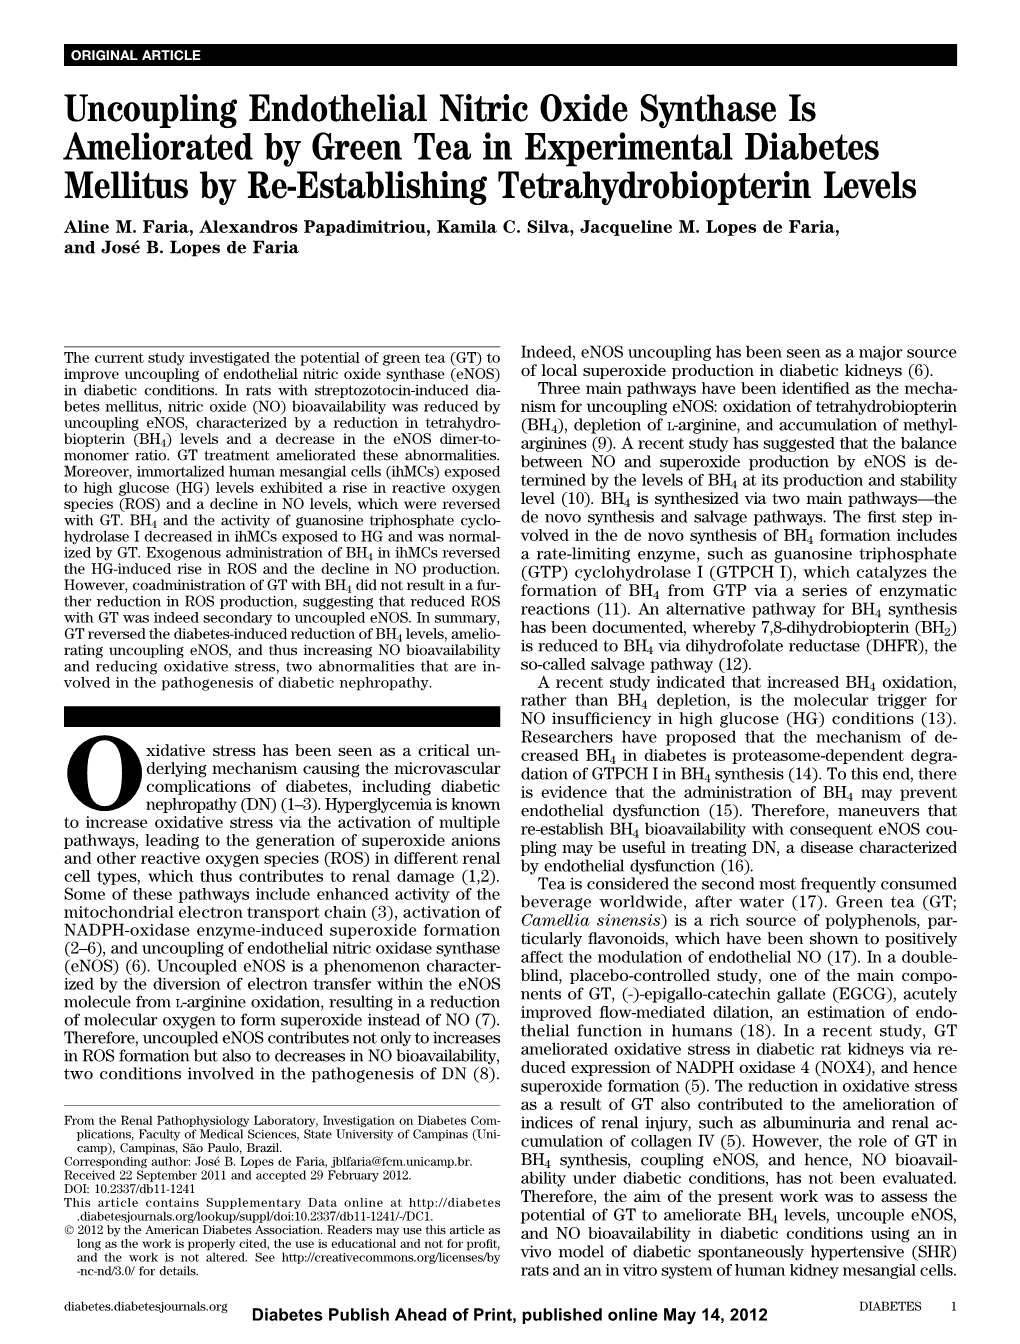 Uncoupling Endothelial Nitric Oxide Synthase Is Ameliorated by Green Tea in Experimental Diabetes Mellitus by Re-Establishing Tetrahydrobiopterin Levels Aline M